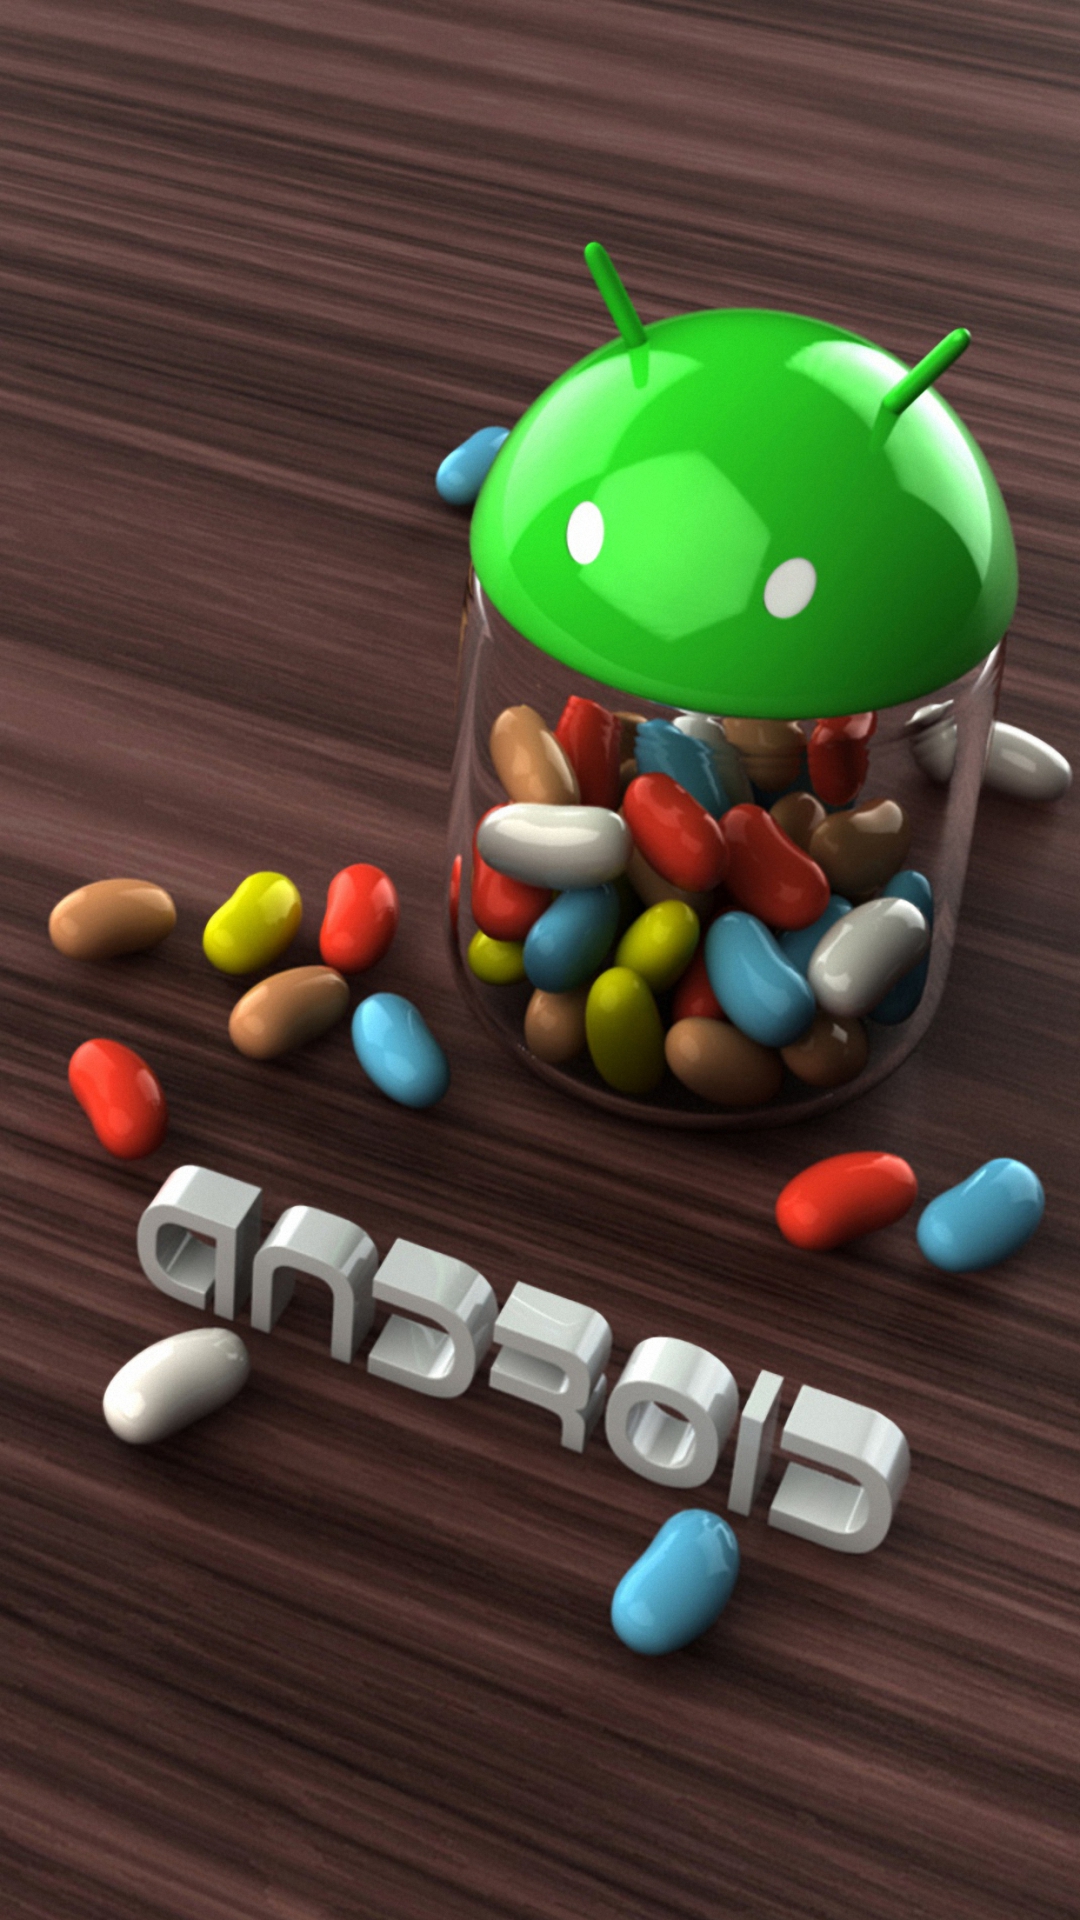 Detail 3d Wallpaper Android Nomer 17